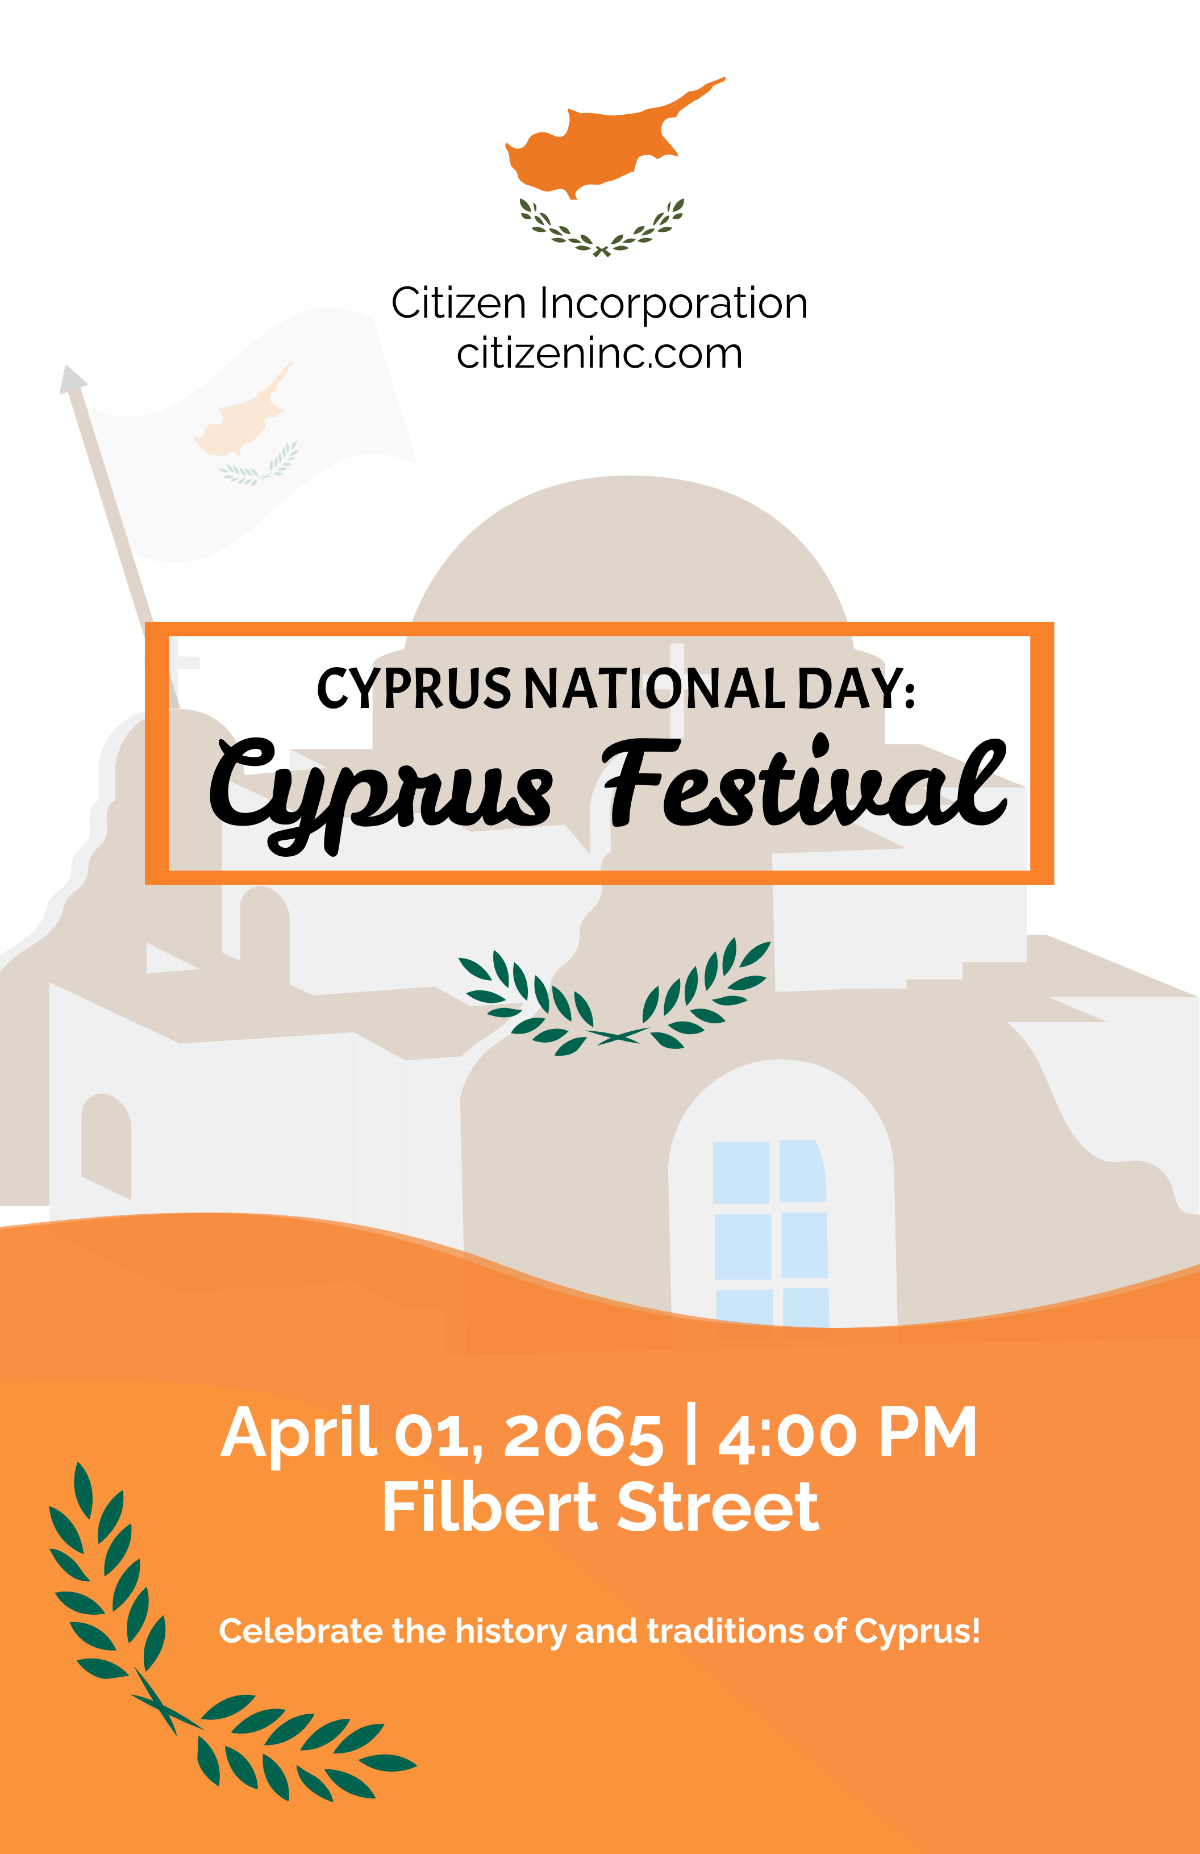 Cyprus National Day Event